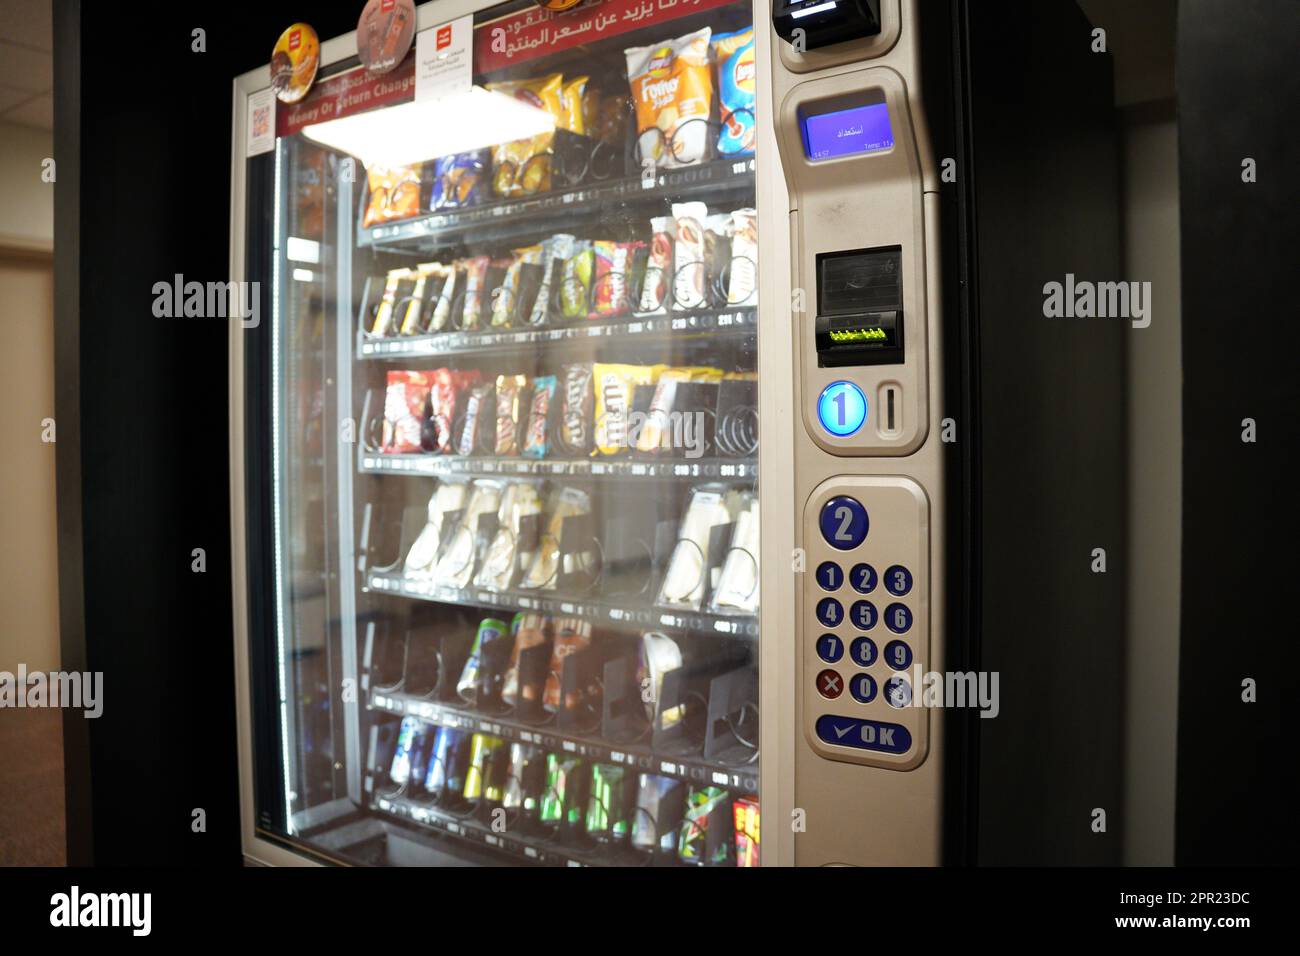 https://c8.alamy.com/comp/2PR23DC/vending-machine-at-university-black-and-silver-vending-machine-in-arabic-with-middle-eastern-products-2PR23DC.jpg